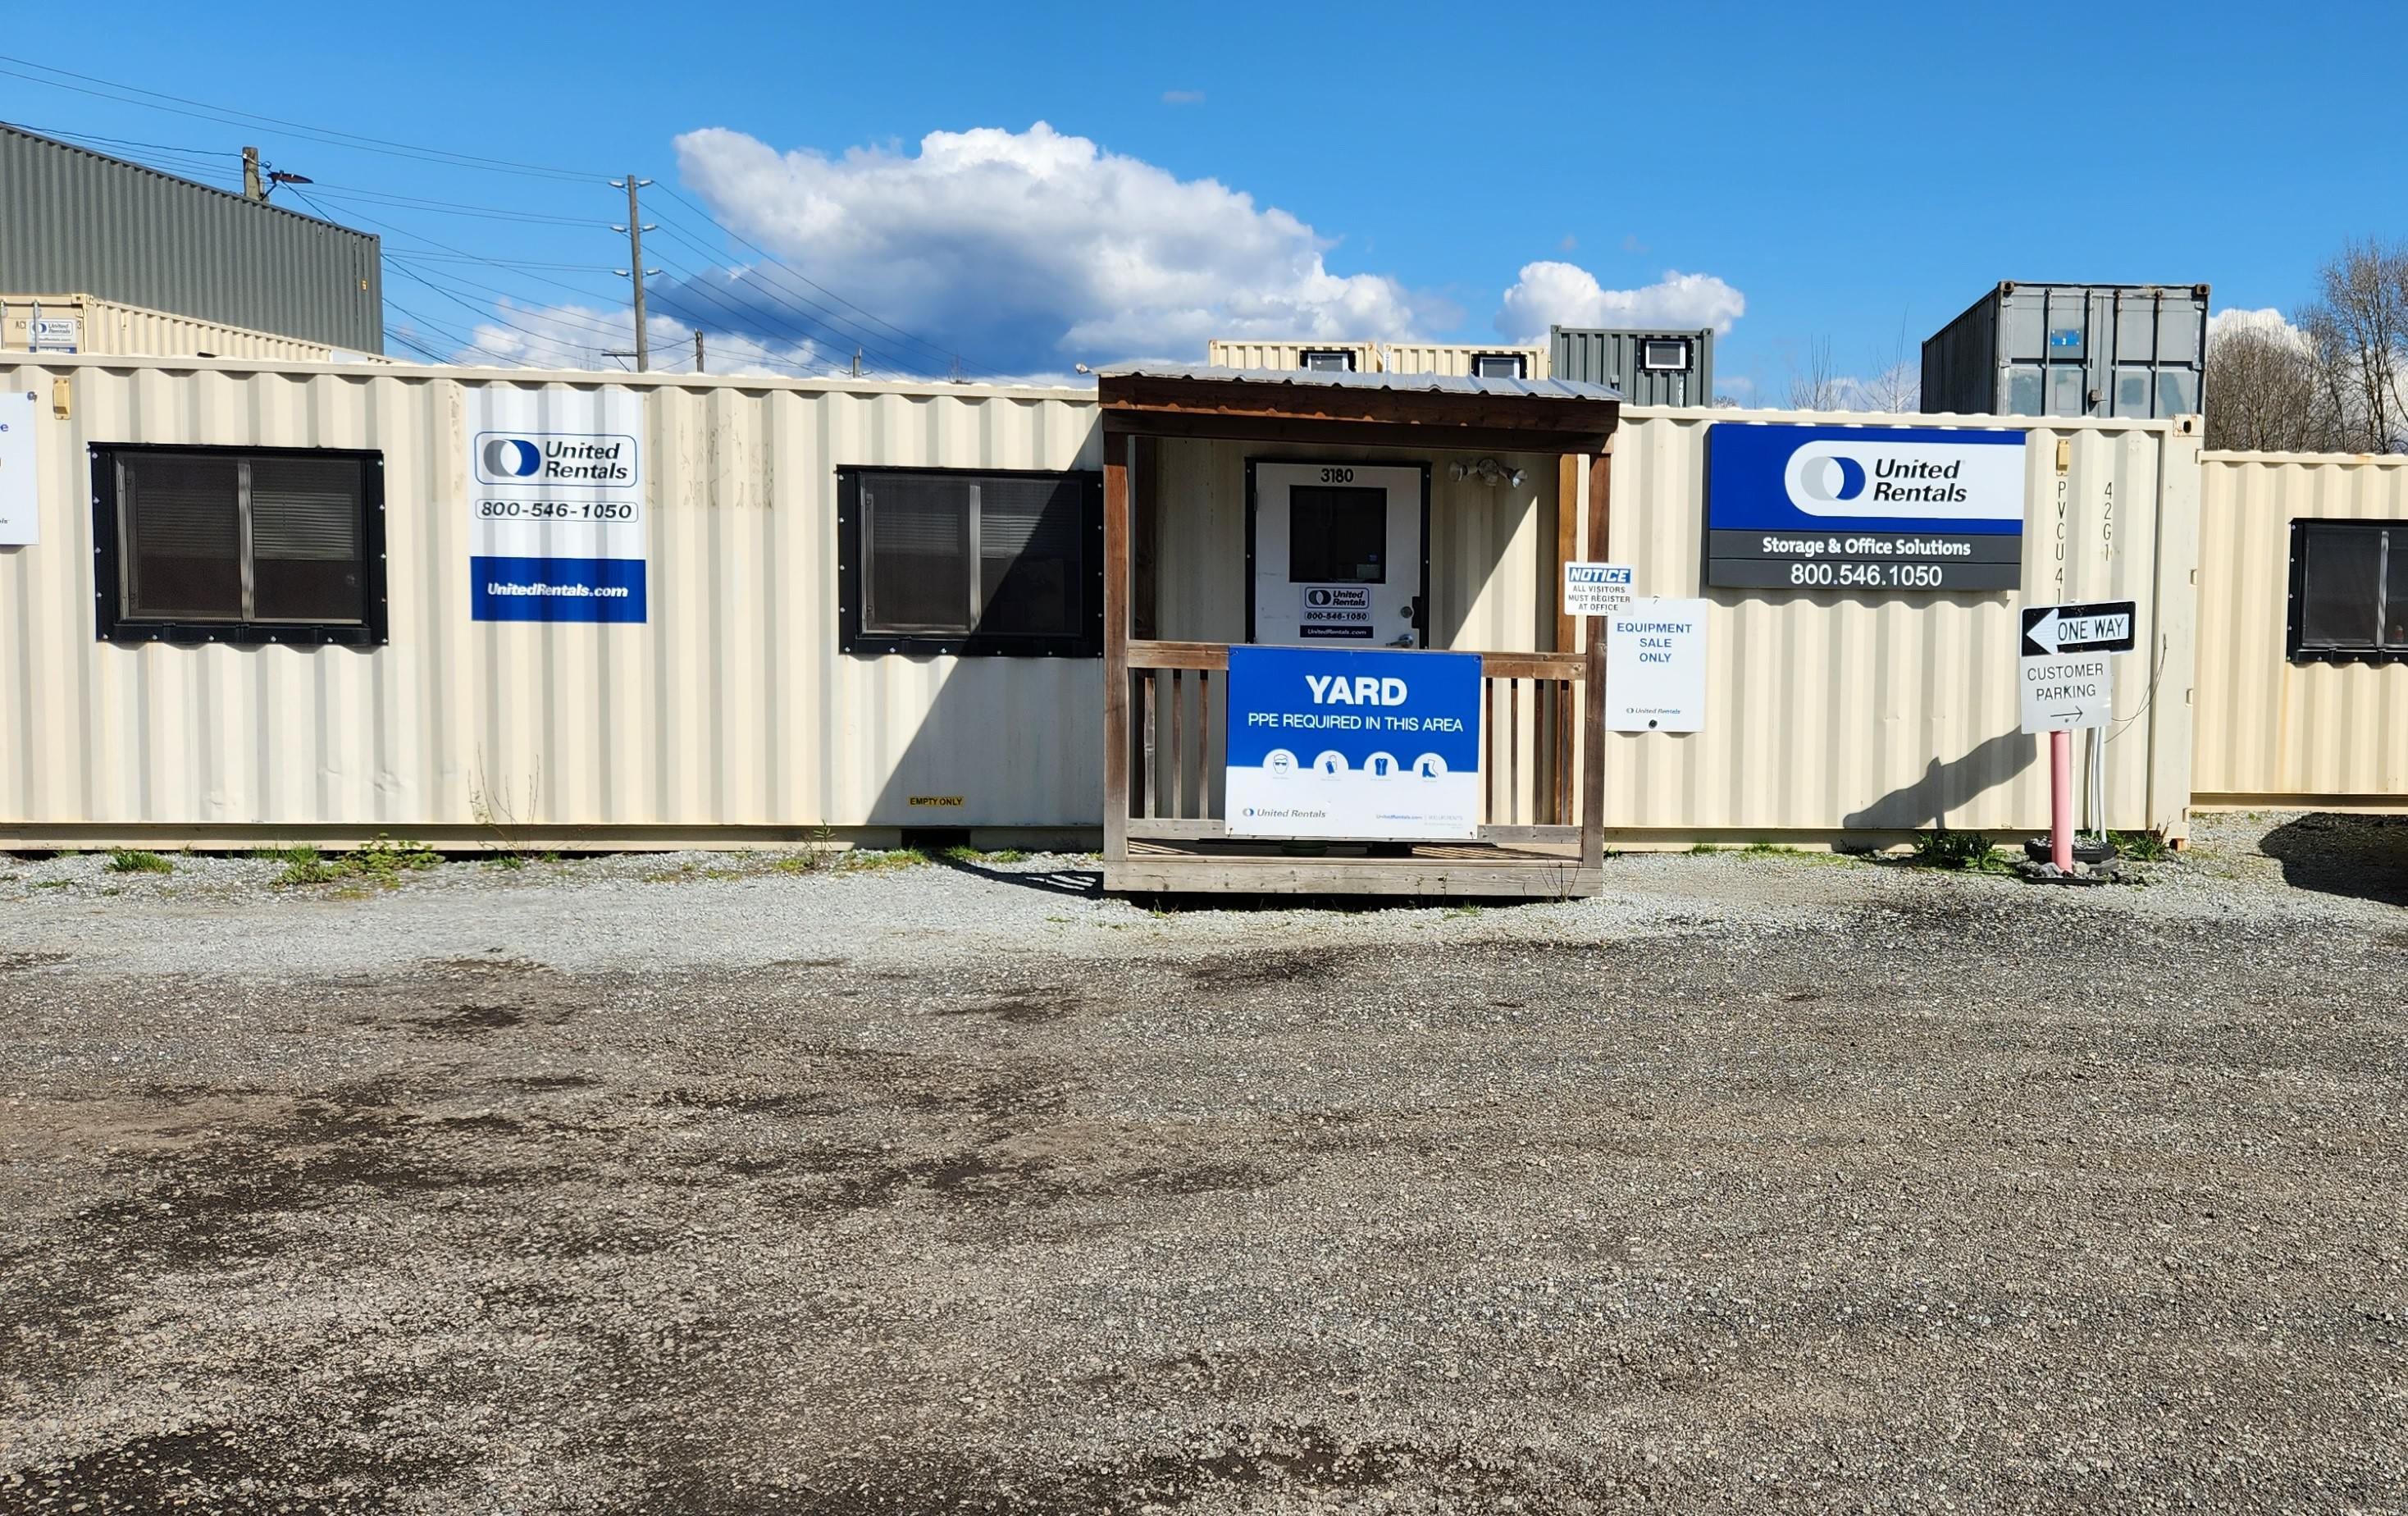 United Rentals - Storage Containers and Mobile Offices Port Coquitlam